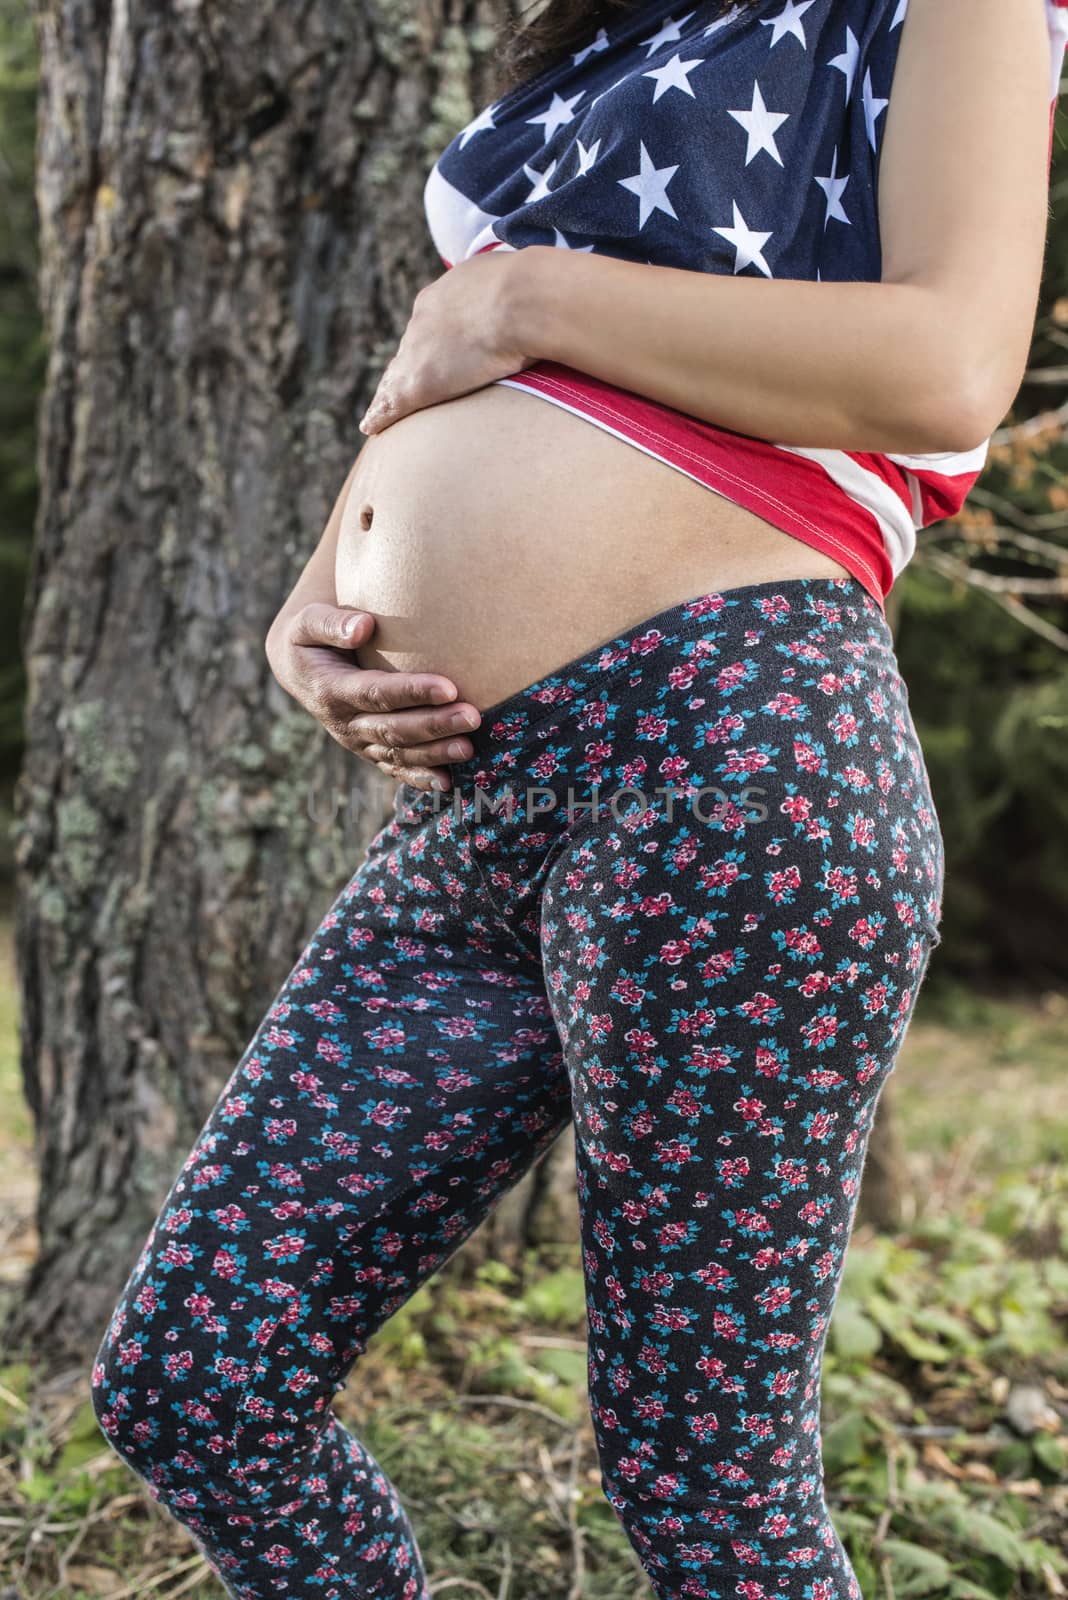 Pregnant woman in the forest. American national flag shirt